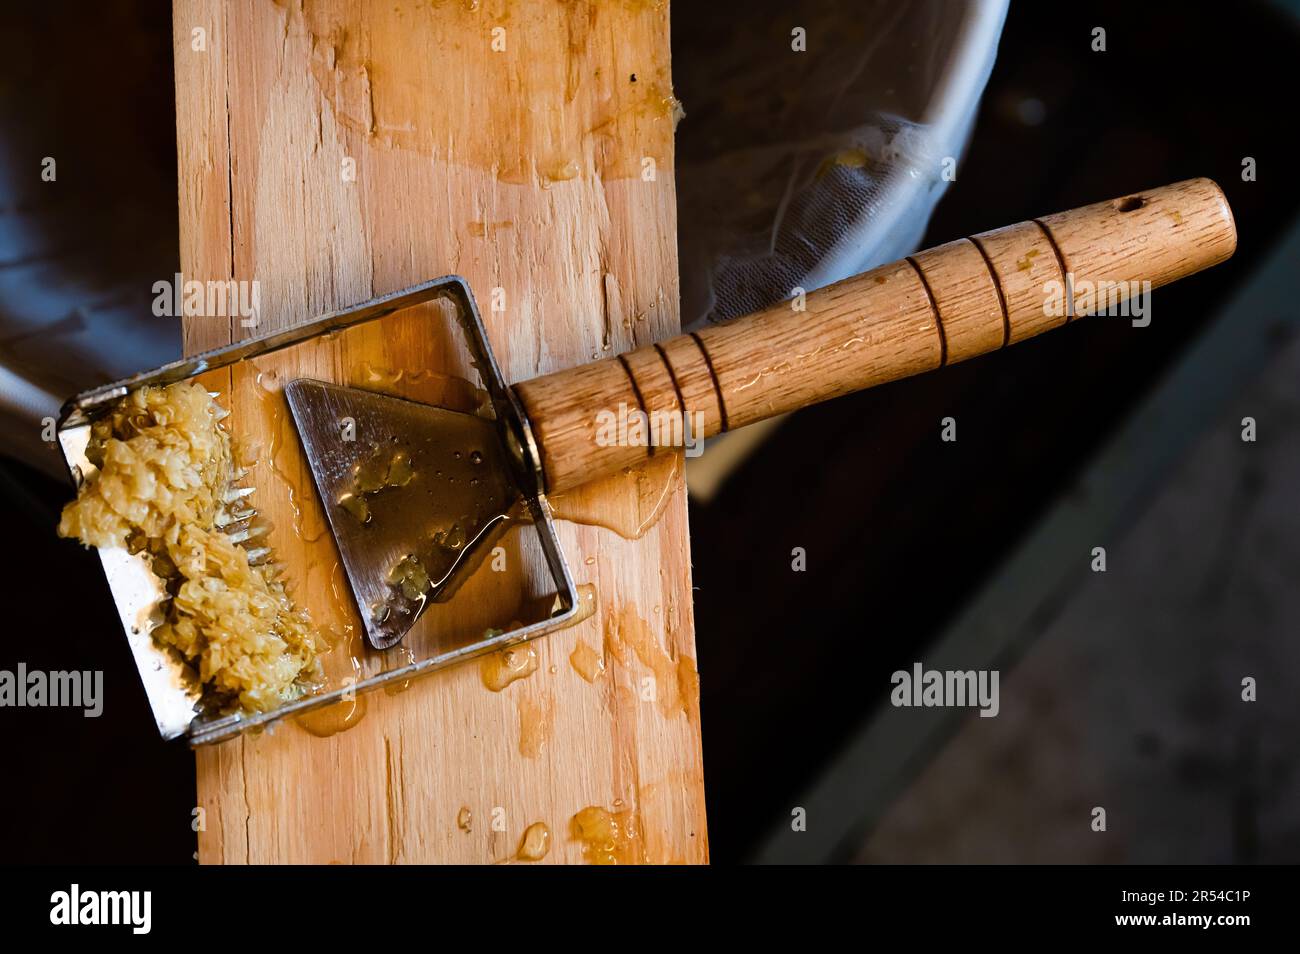 A honey uncapping tool with beeswax on it sitting on a wood board Stock Photo